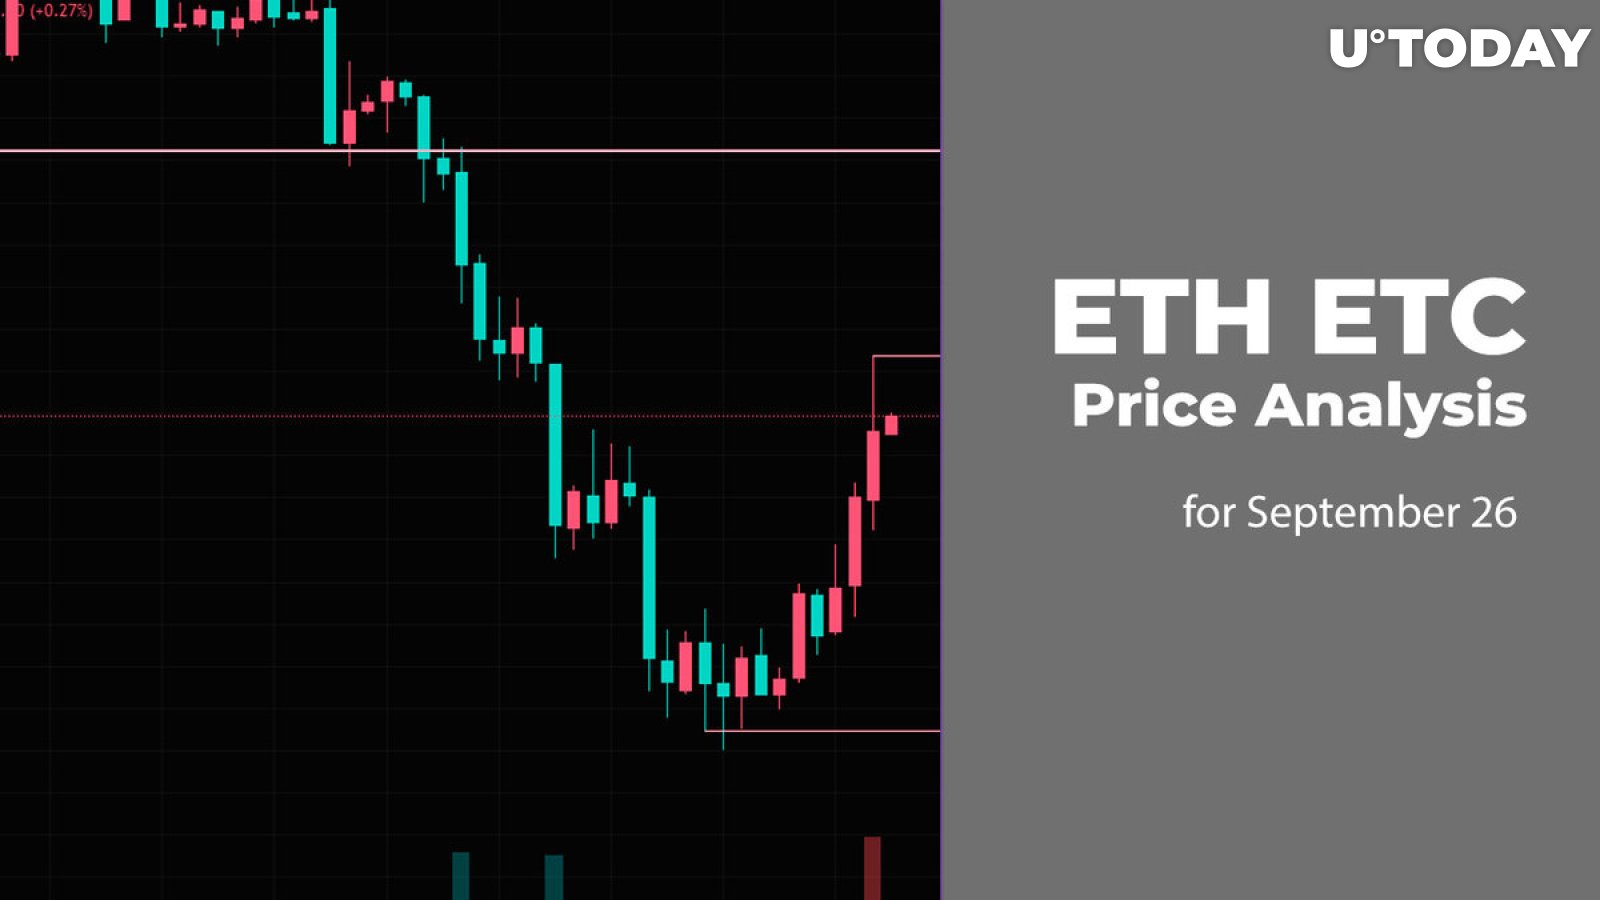 ETH and ETC Price Analysis for September 26